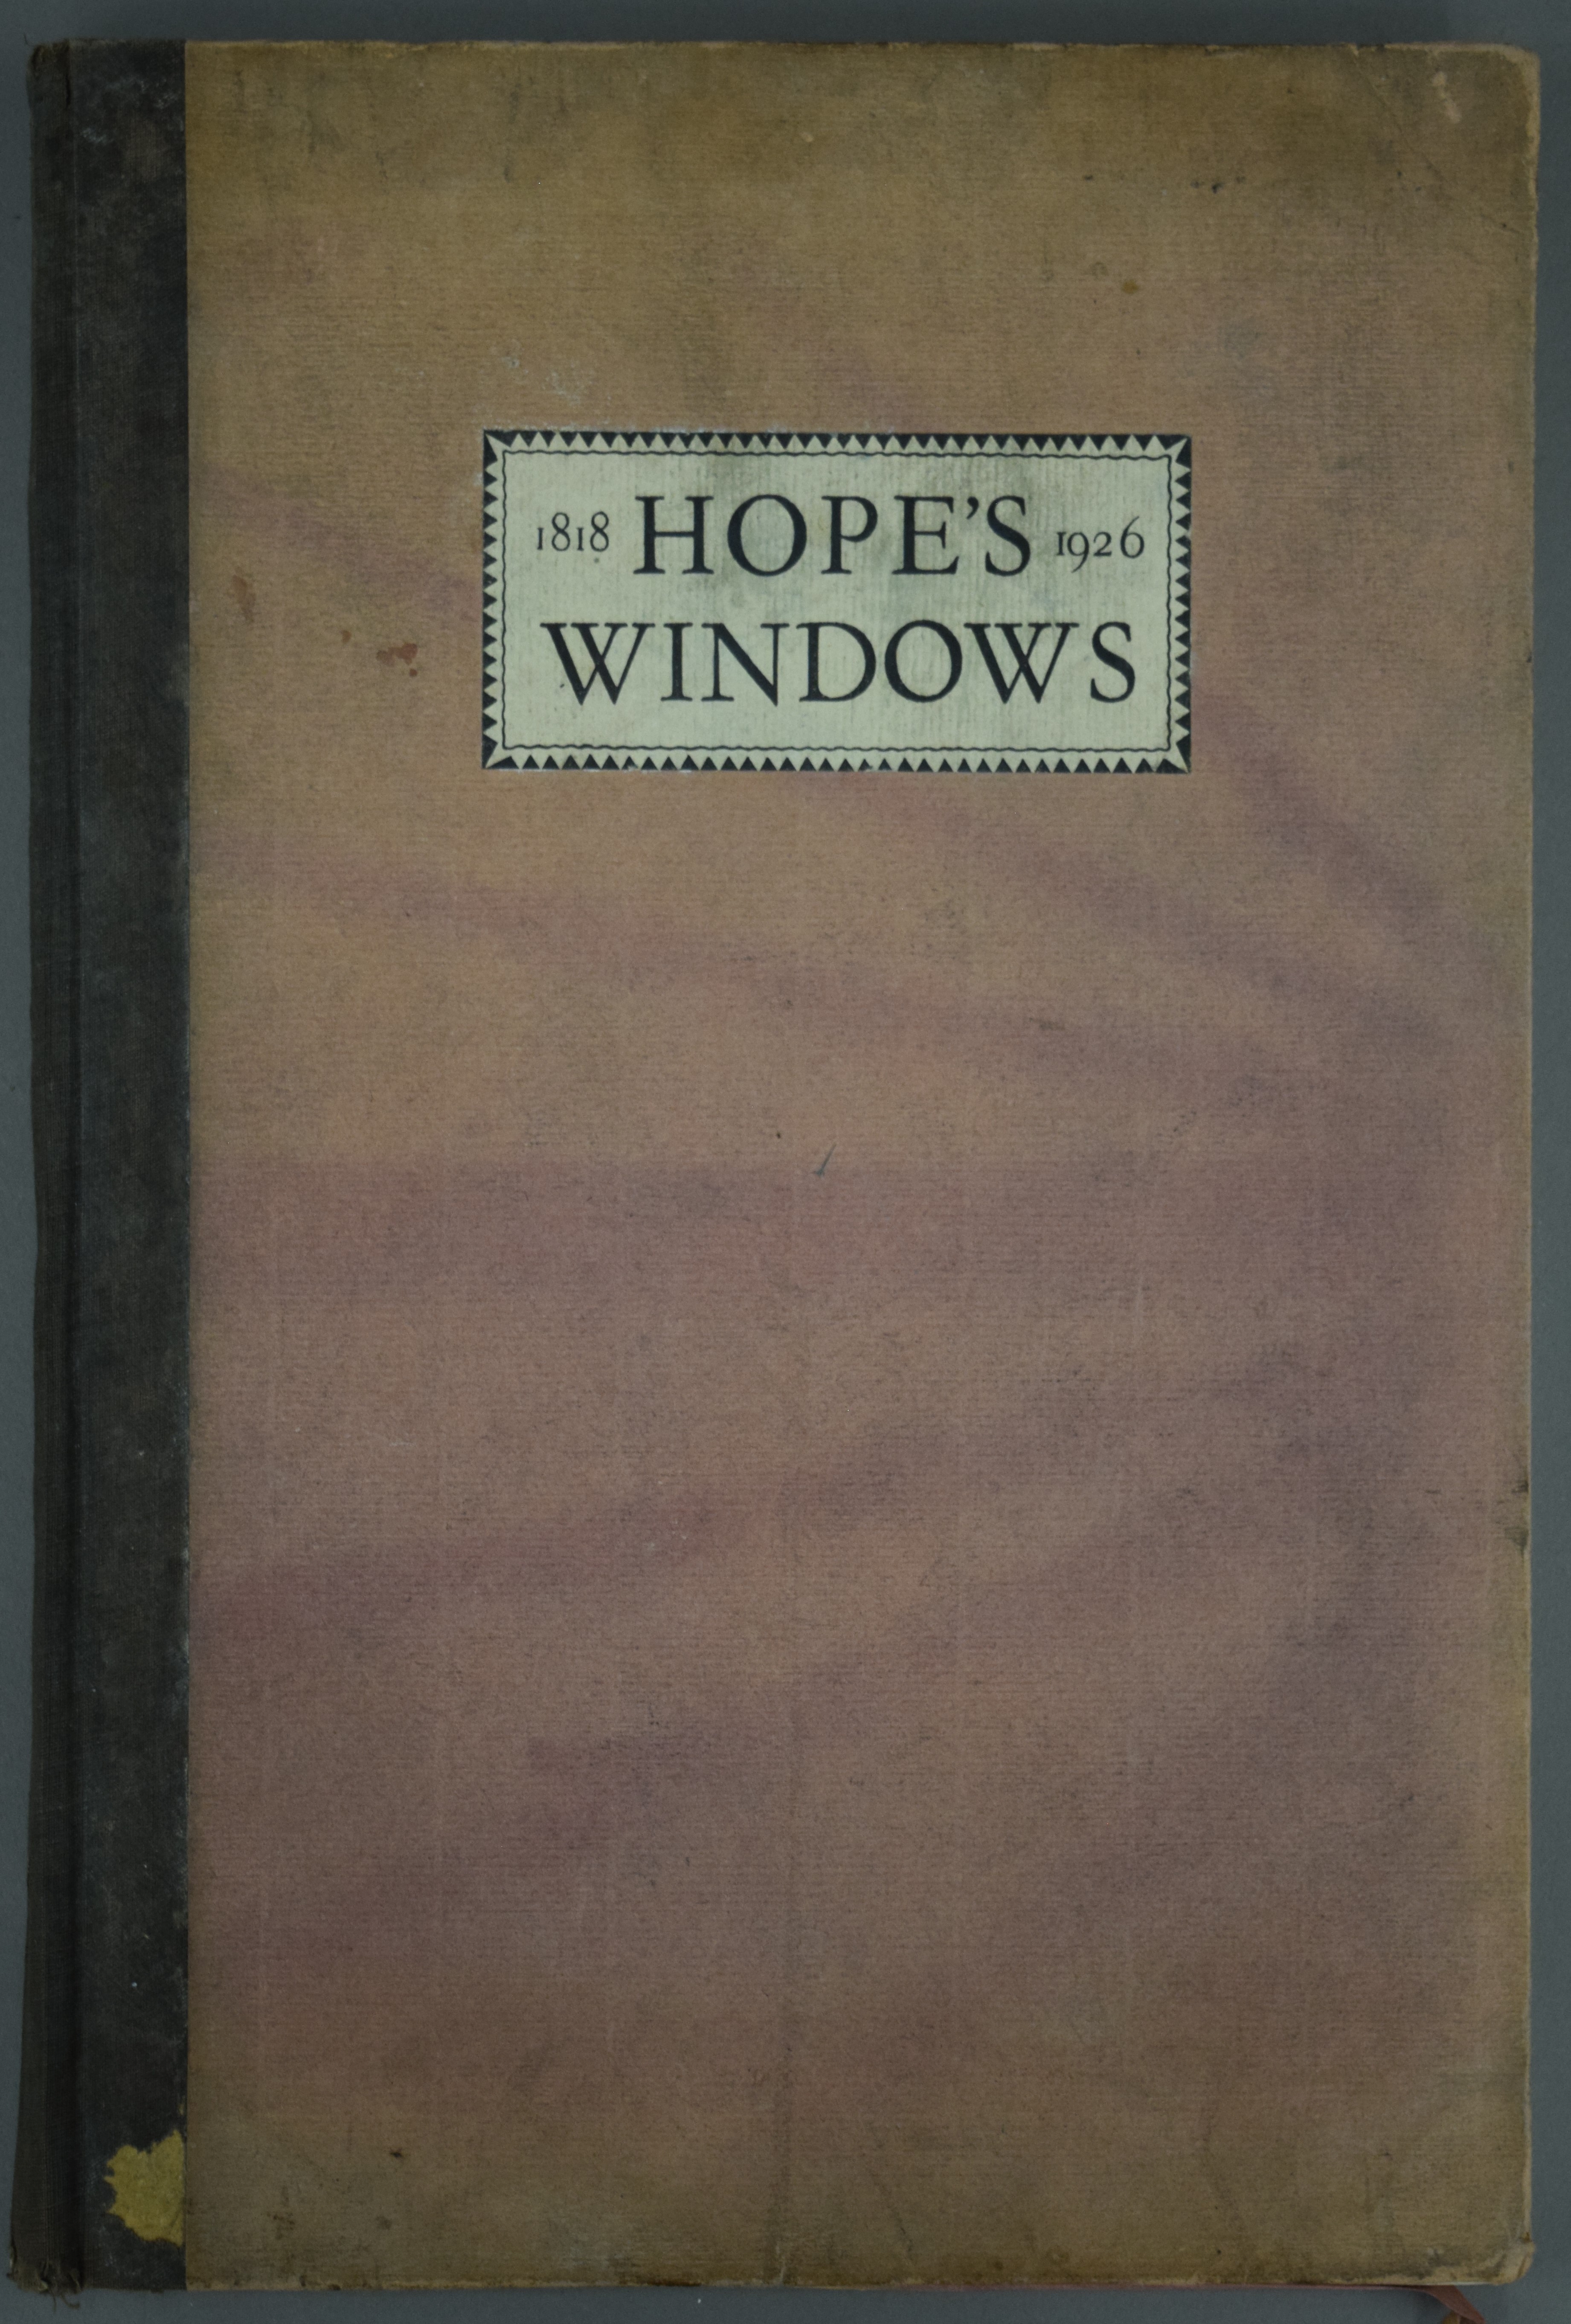 A 1920s catalogue for Hopes Windows (1818-1926) and W A Hudson Ltd Encyclopaedia of Furnishing